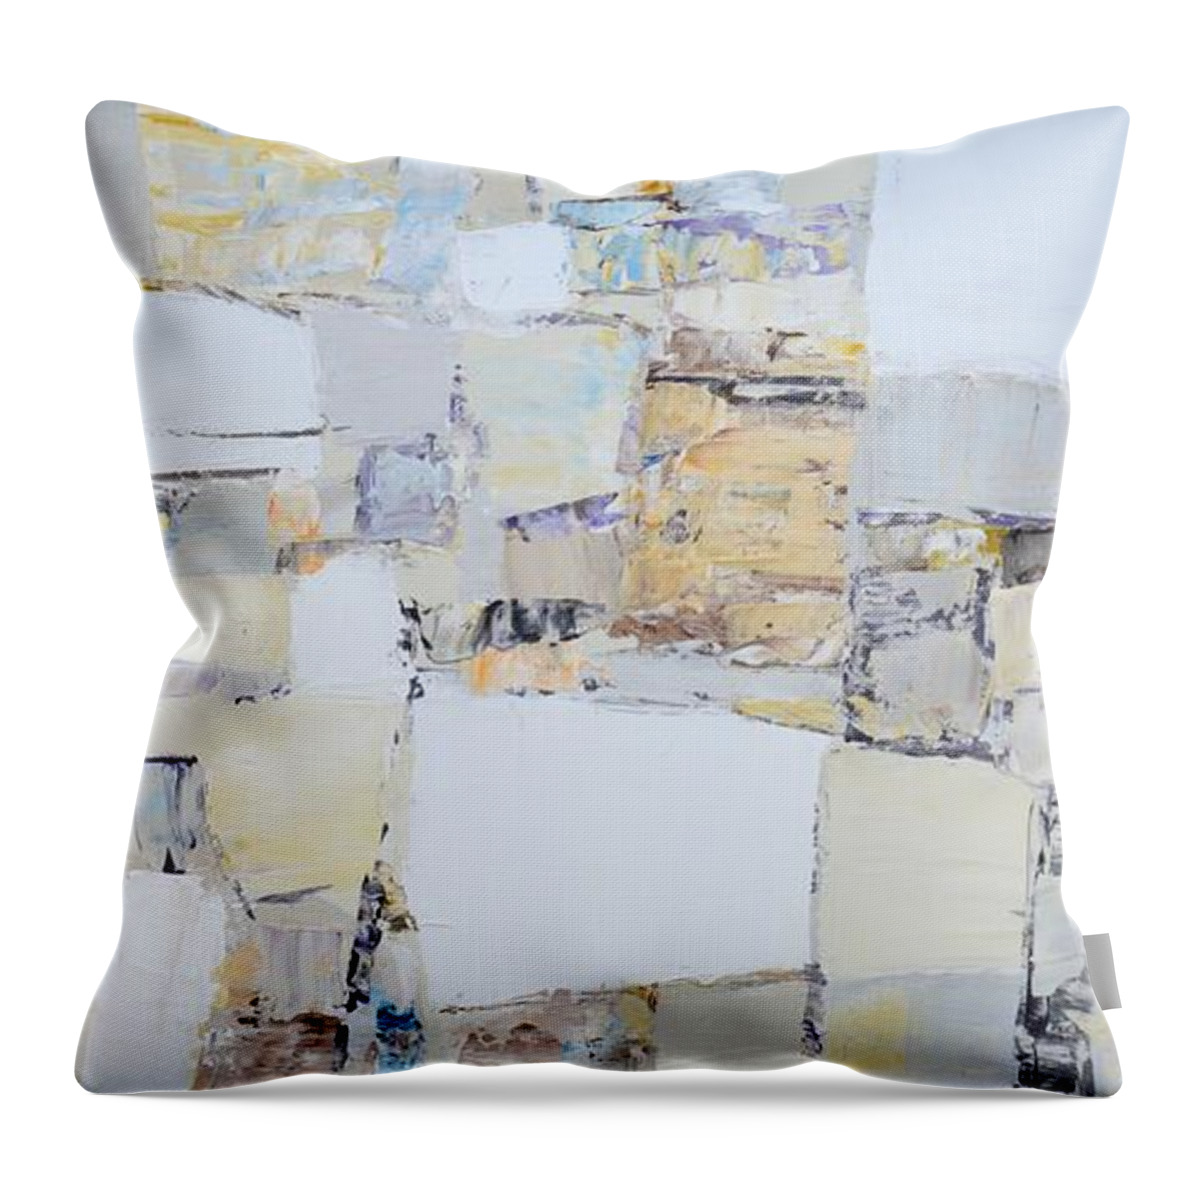 Abstraction Throw Pillow featuring the painting 	Abstraction 8. by Iryna Kastsova